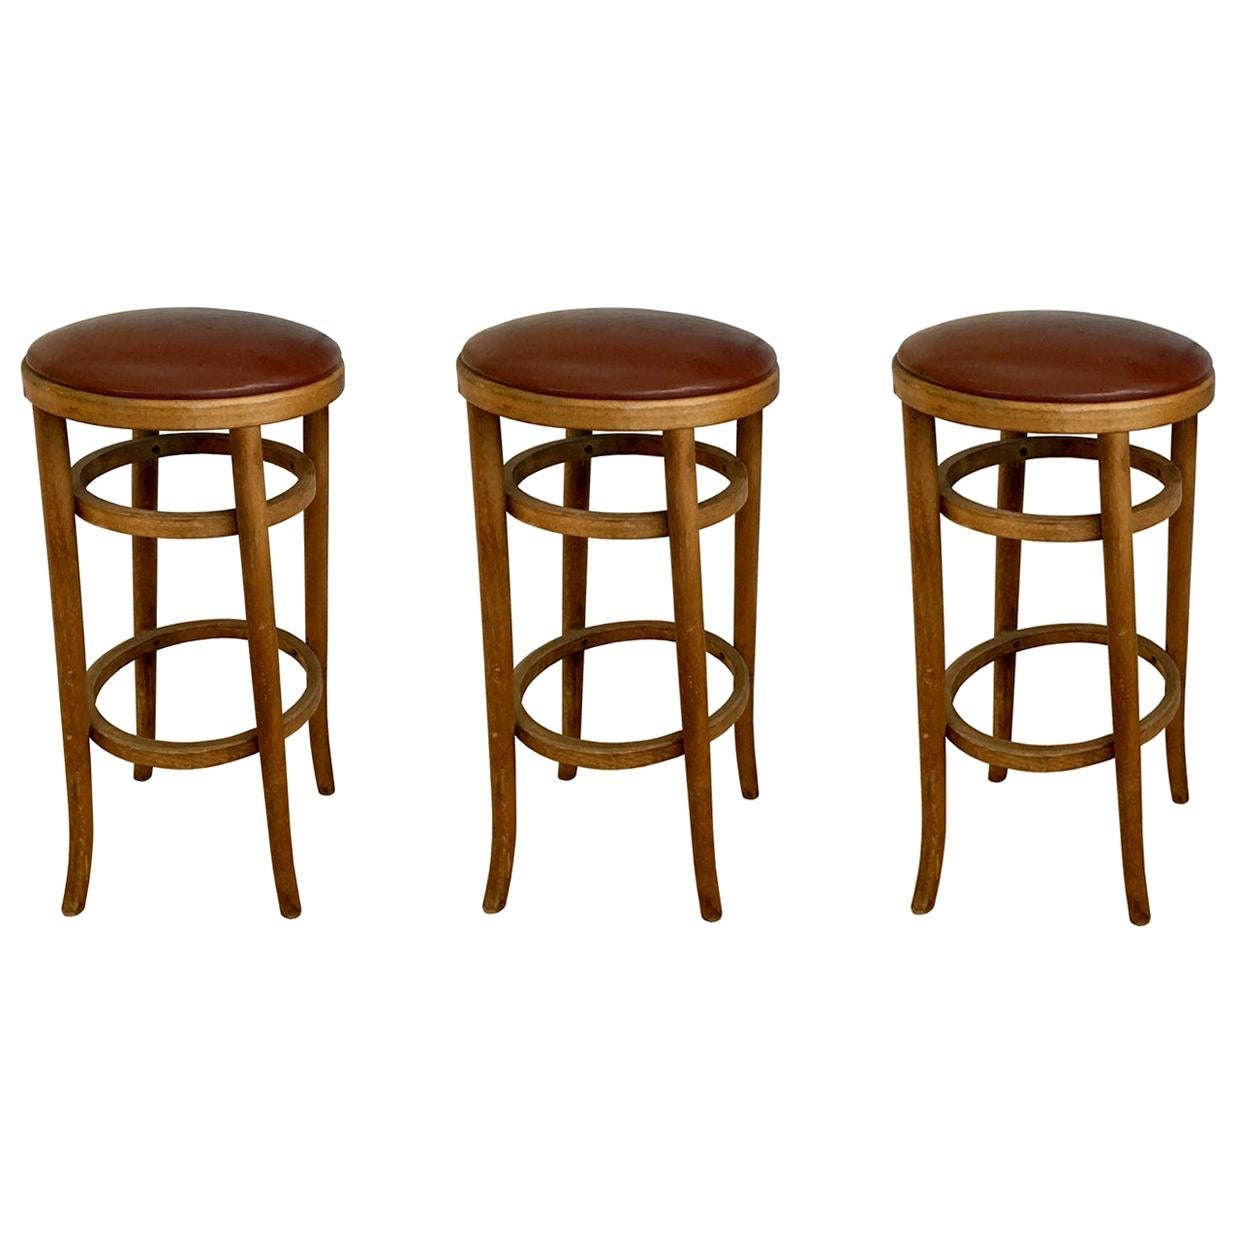 Set of 4 Barstools by Thonet